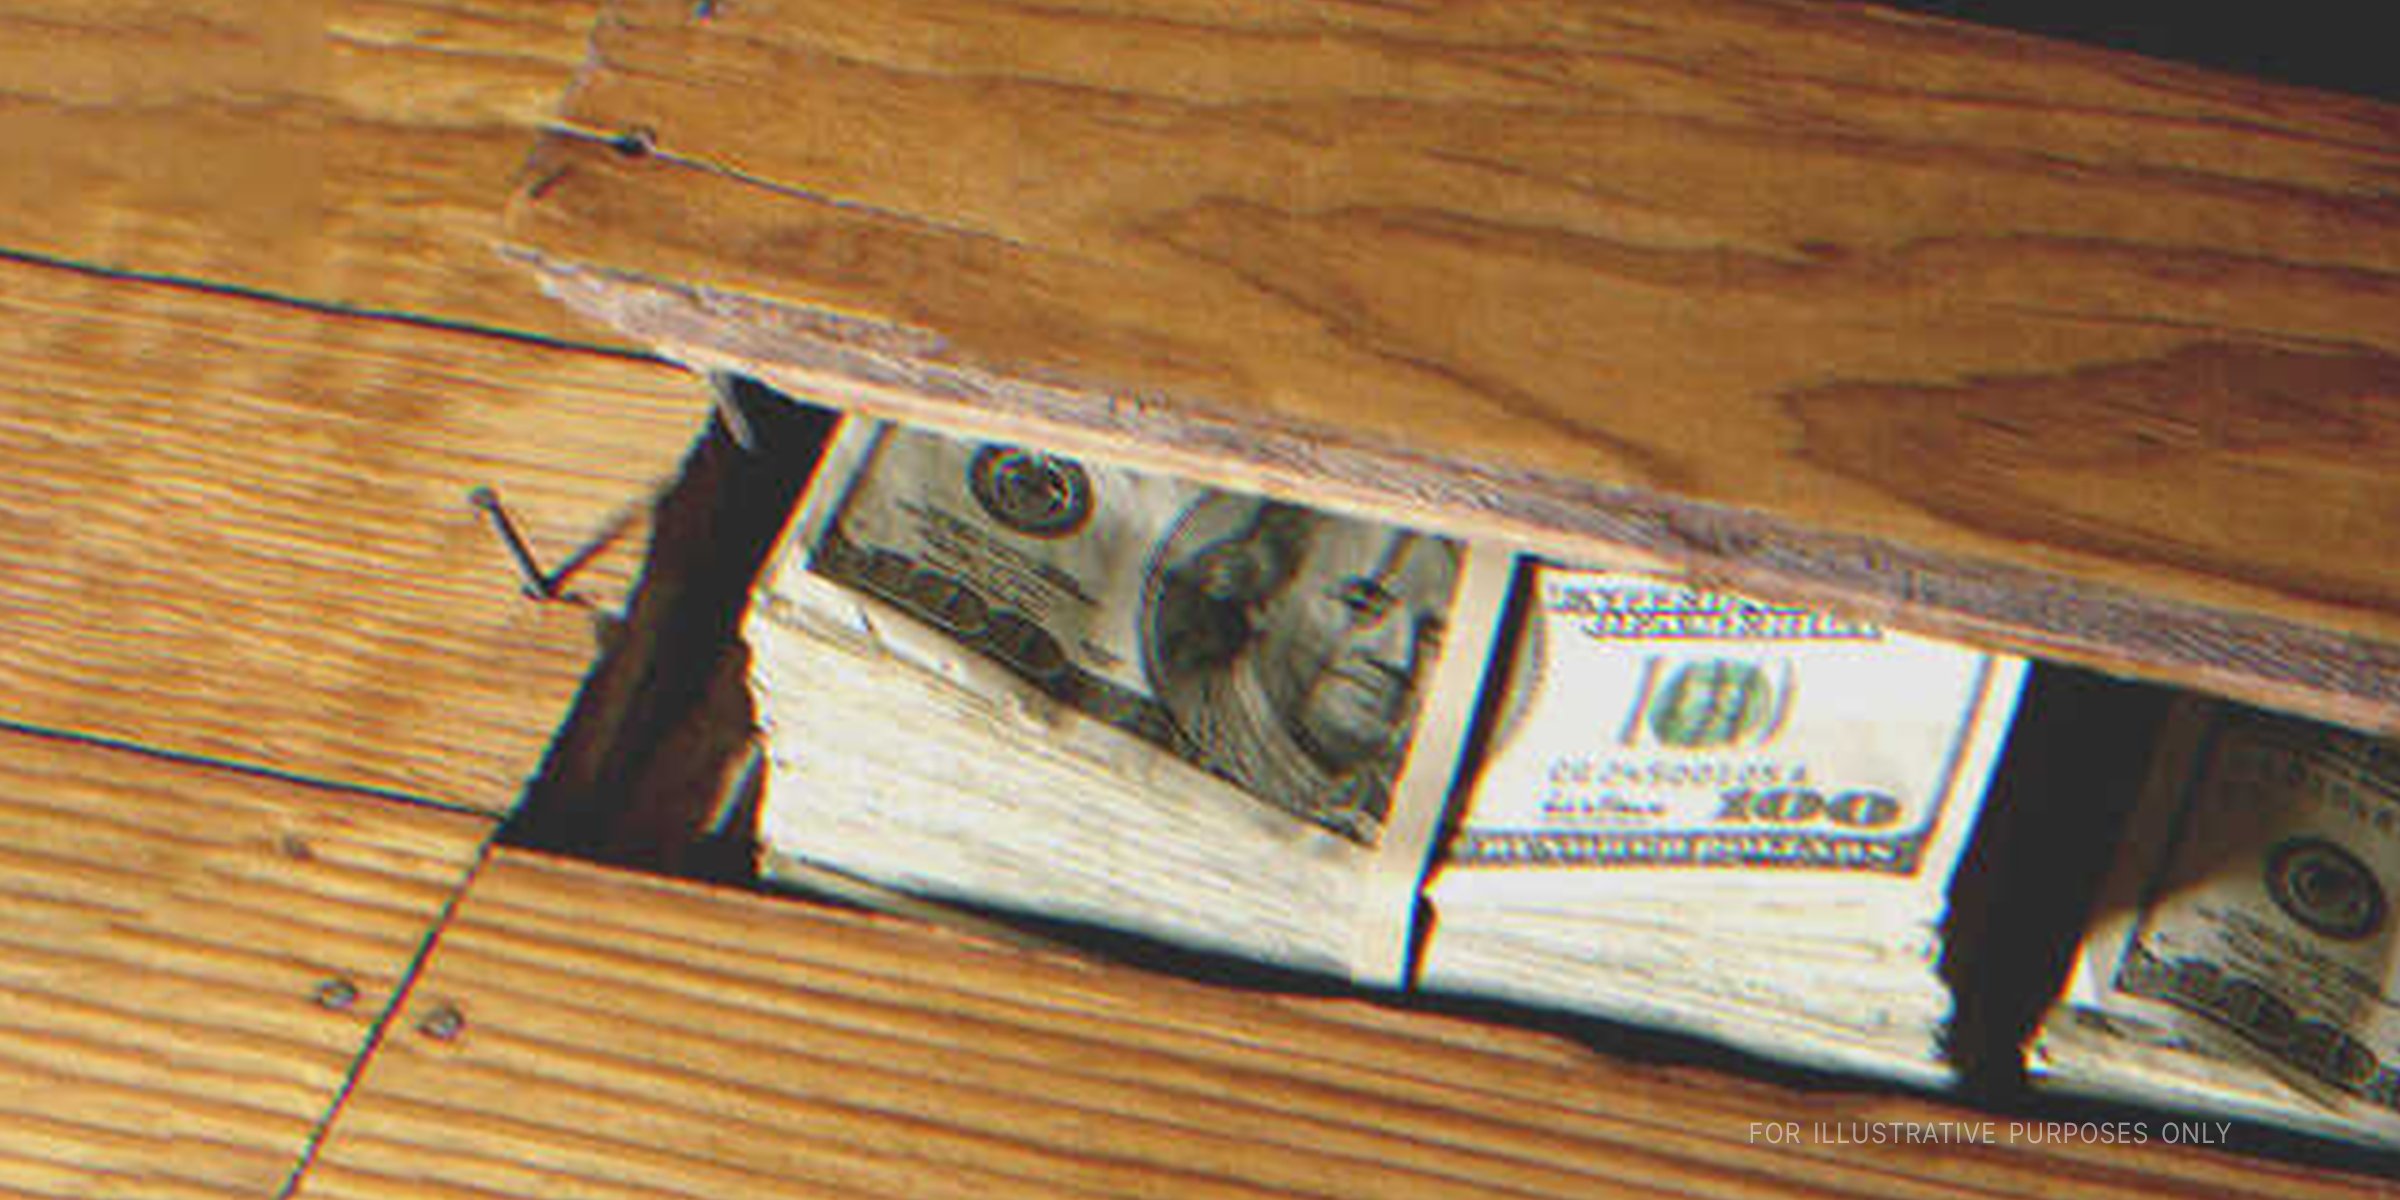 Wads Of Cash Underneath Wooden Flooring. | Source: Getty Images